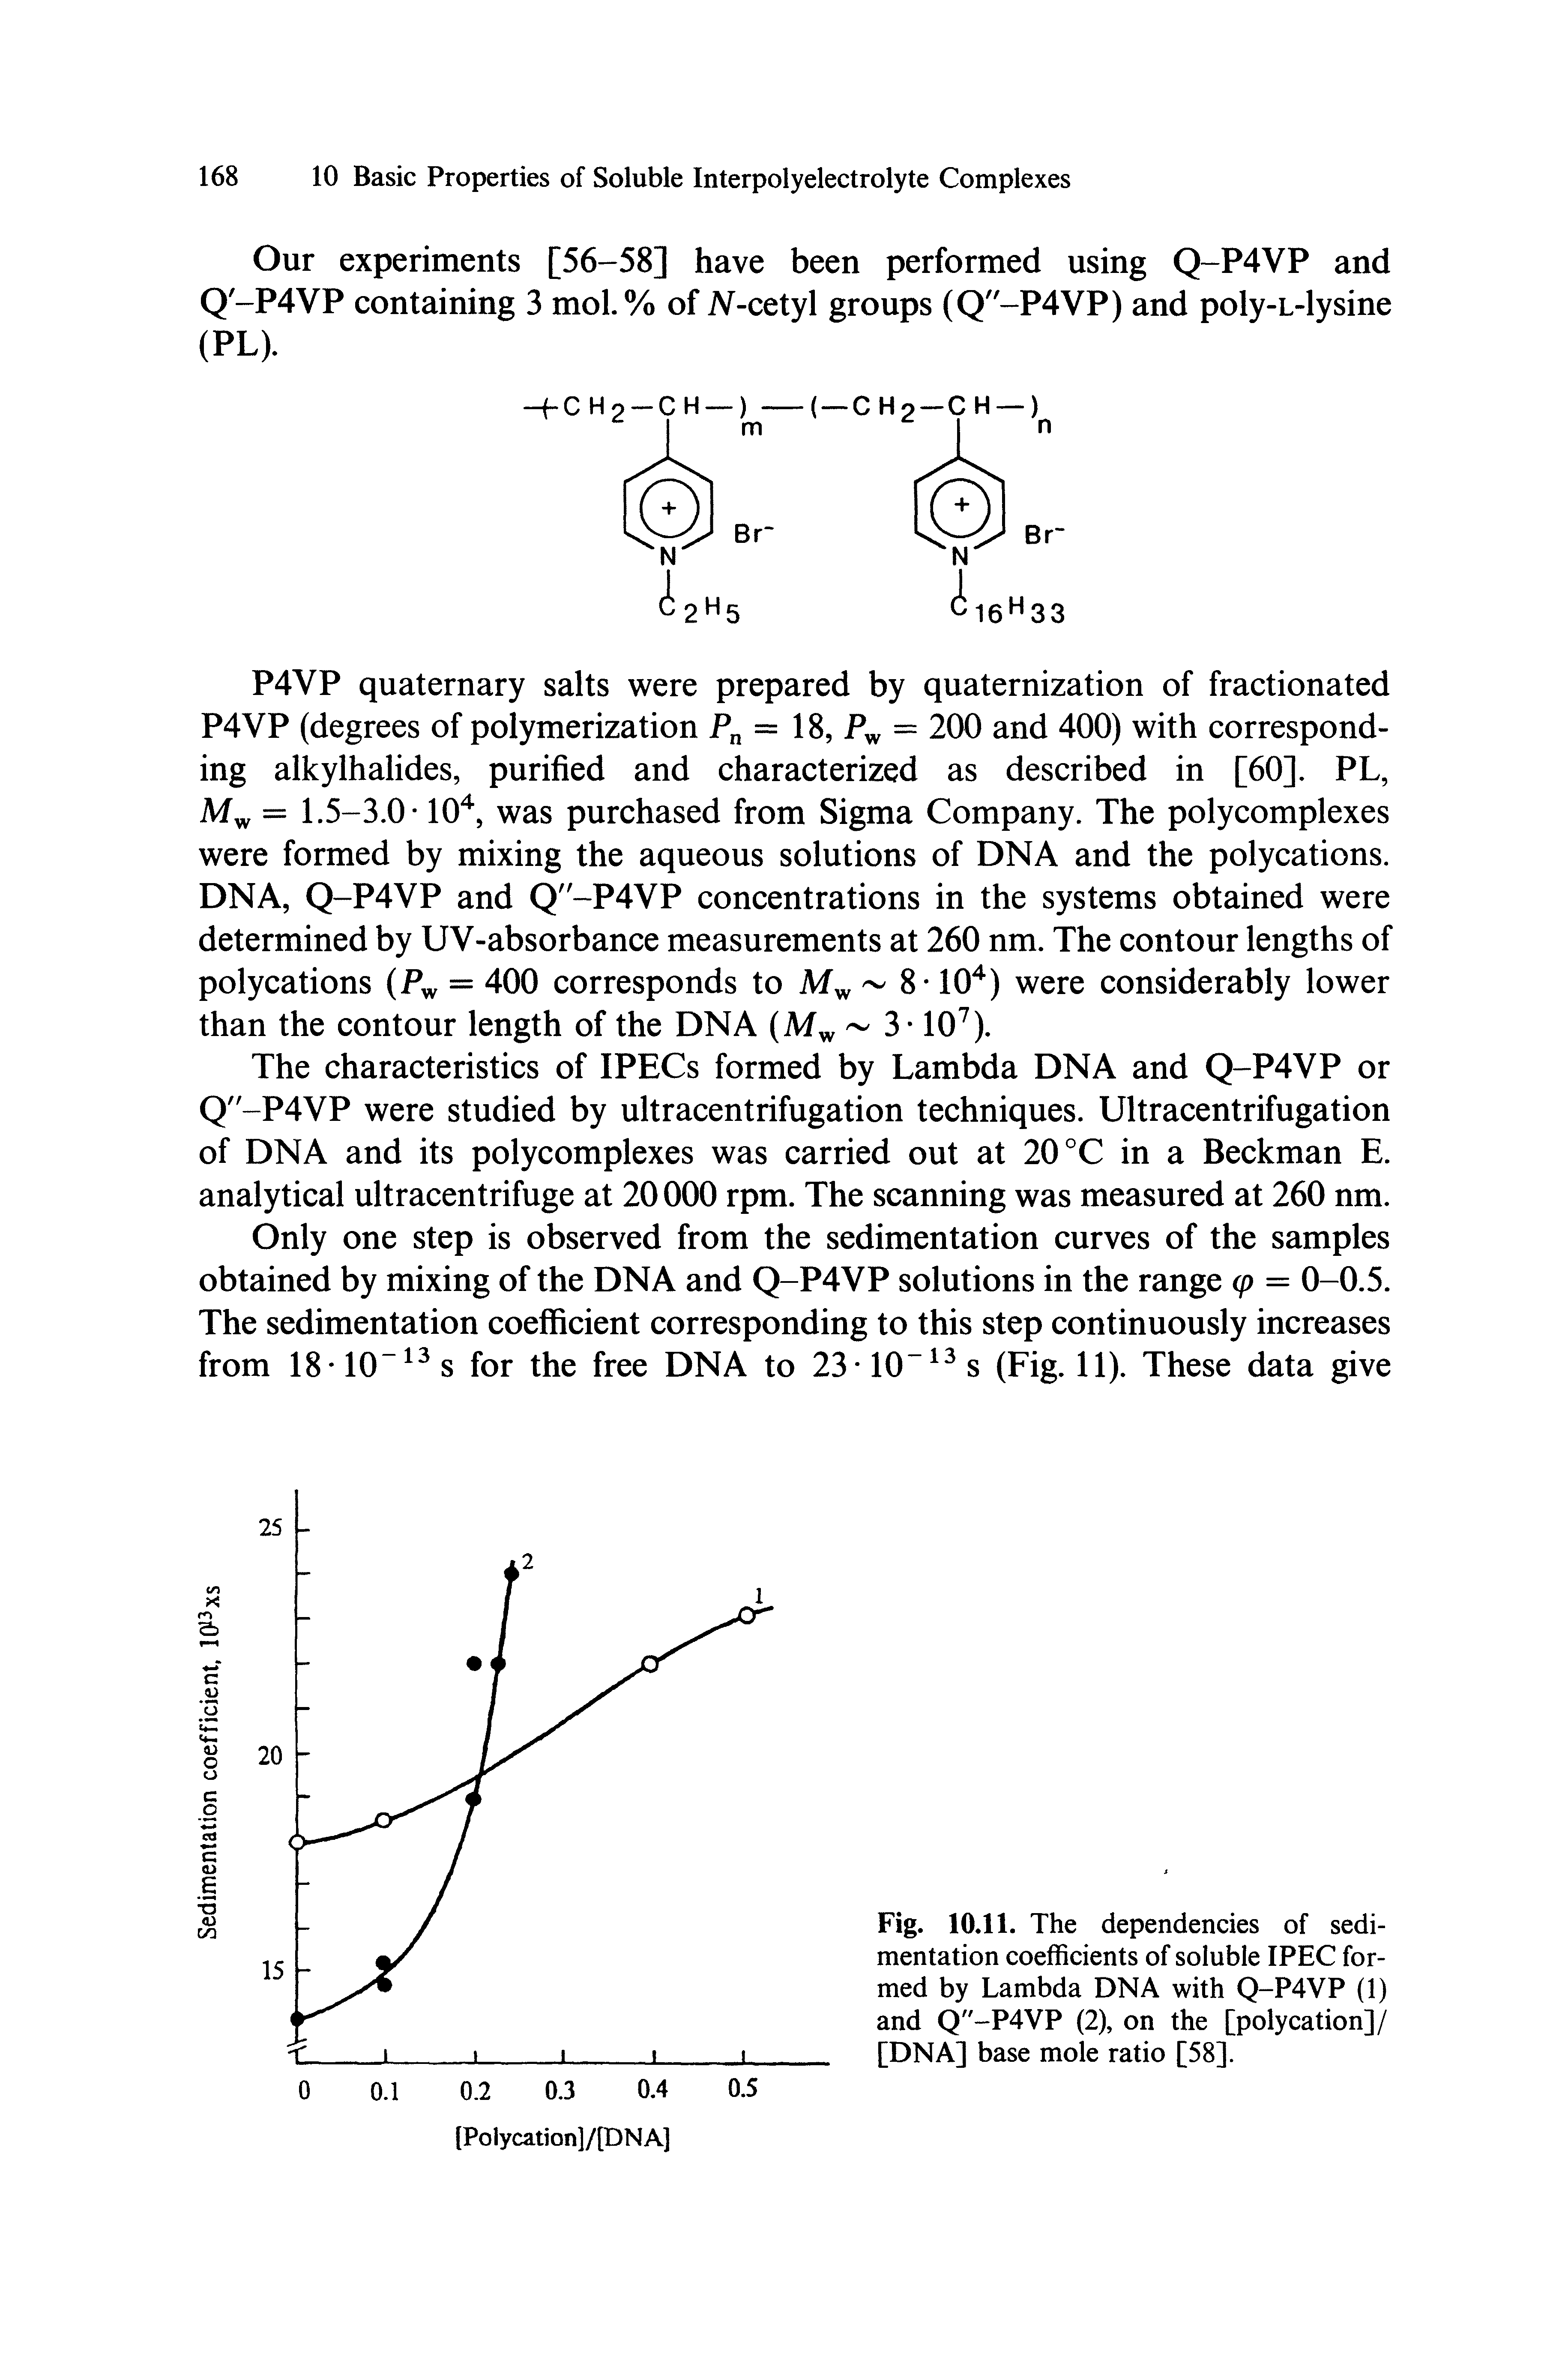 Fig. 10.11. The dependencies of sedimentation coefficients of soluble IPEC formed by Lambda DNA with Q-P4VP (1) and Q"-P4VP (2), on the [polycation]/ [DNA] base mole ratio [58].